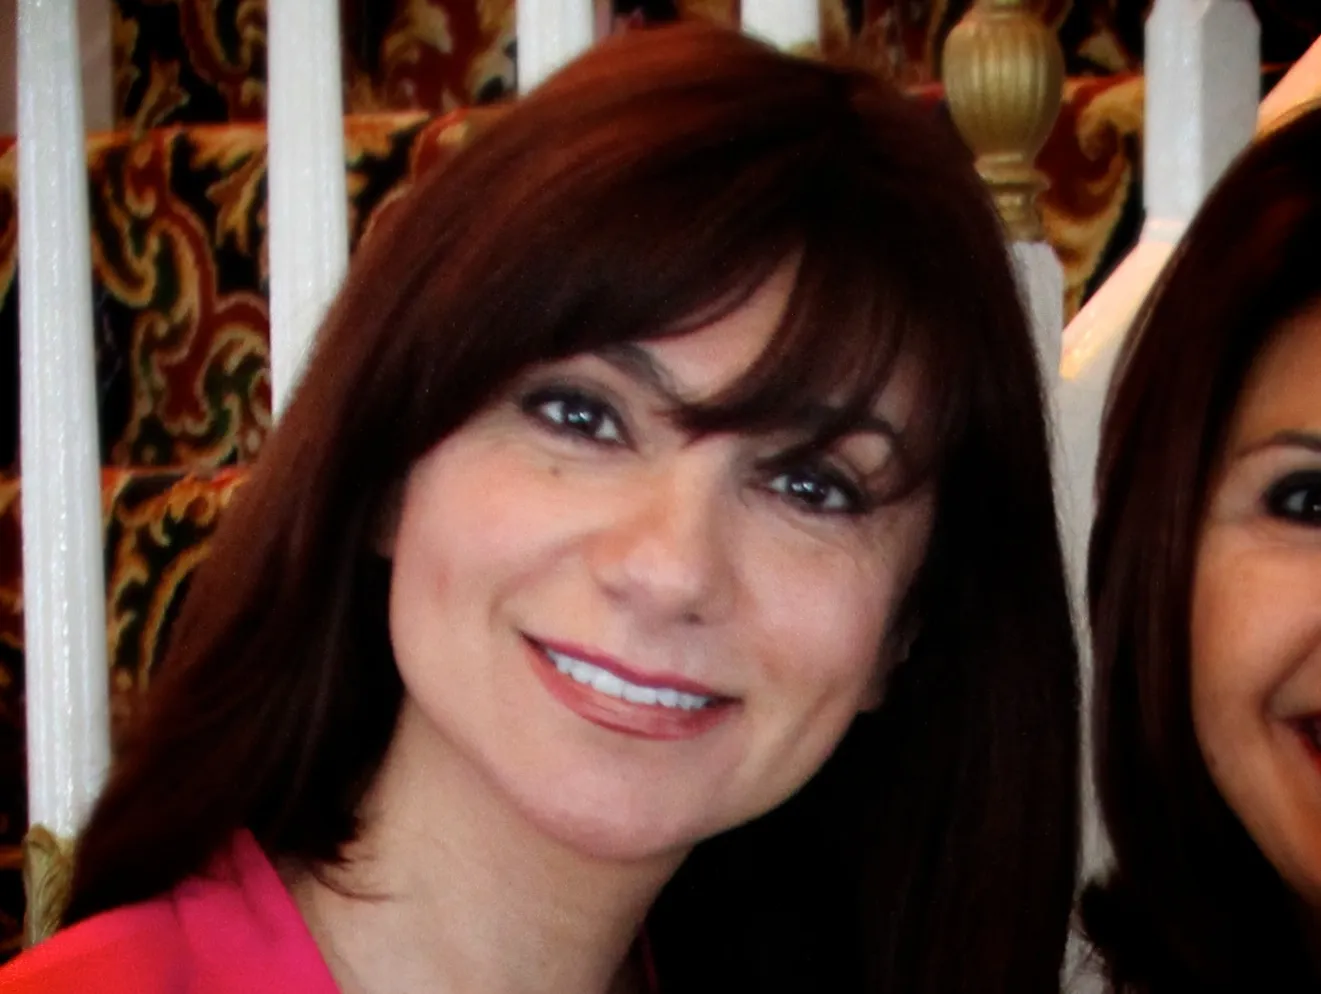 Nana Sarkisian is owner of Cal Auto Body, a Diamond Certified company since 2011. She can be reached at (650) 273-5401 or by email.